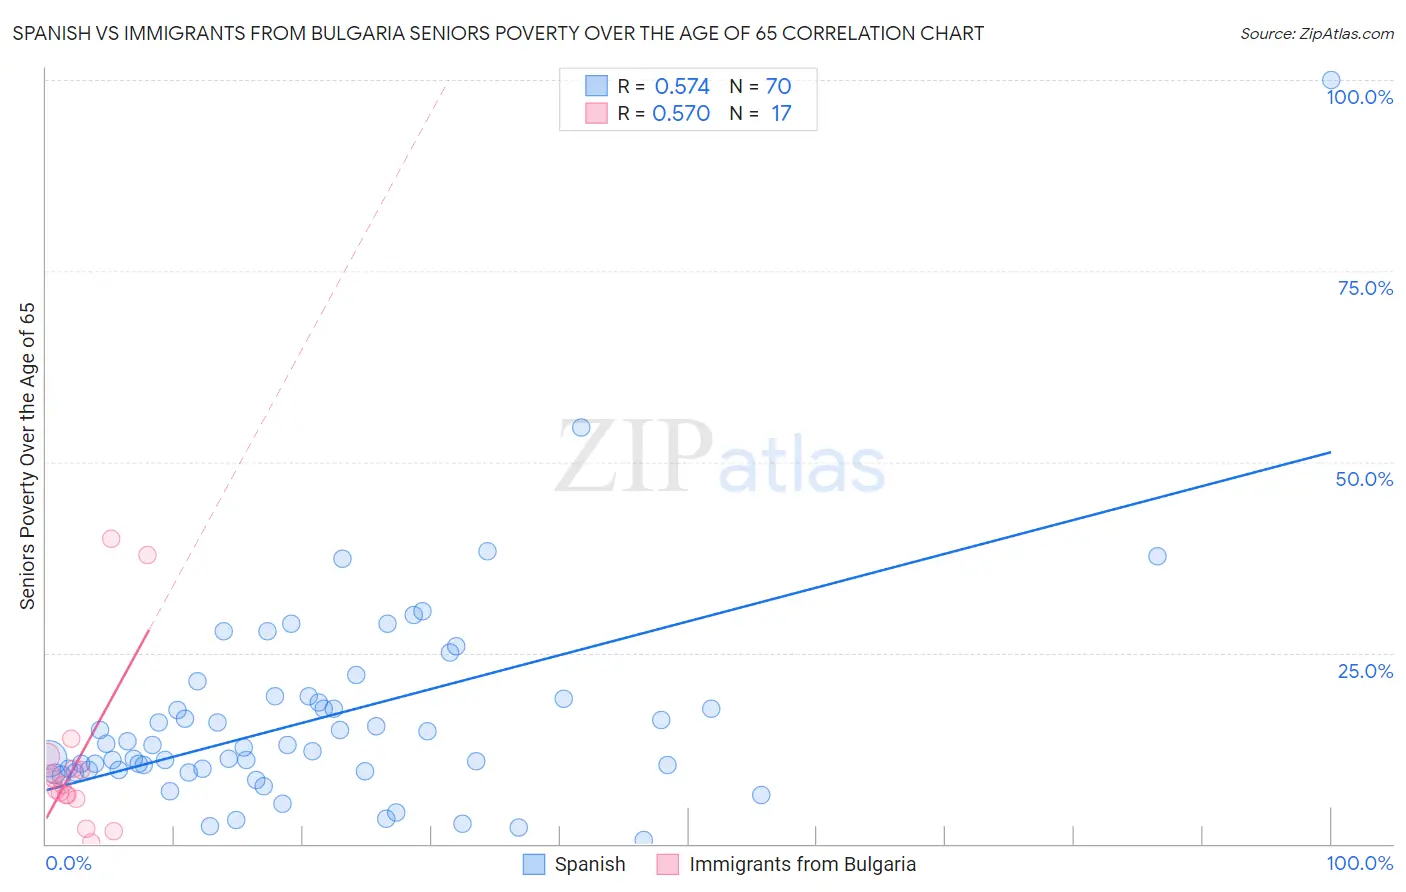 Spanish vs Immigrants from Bulgaria Seniors Poverty Over the Age of 65